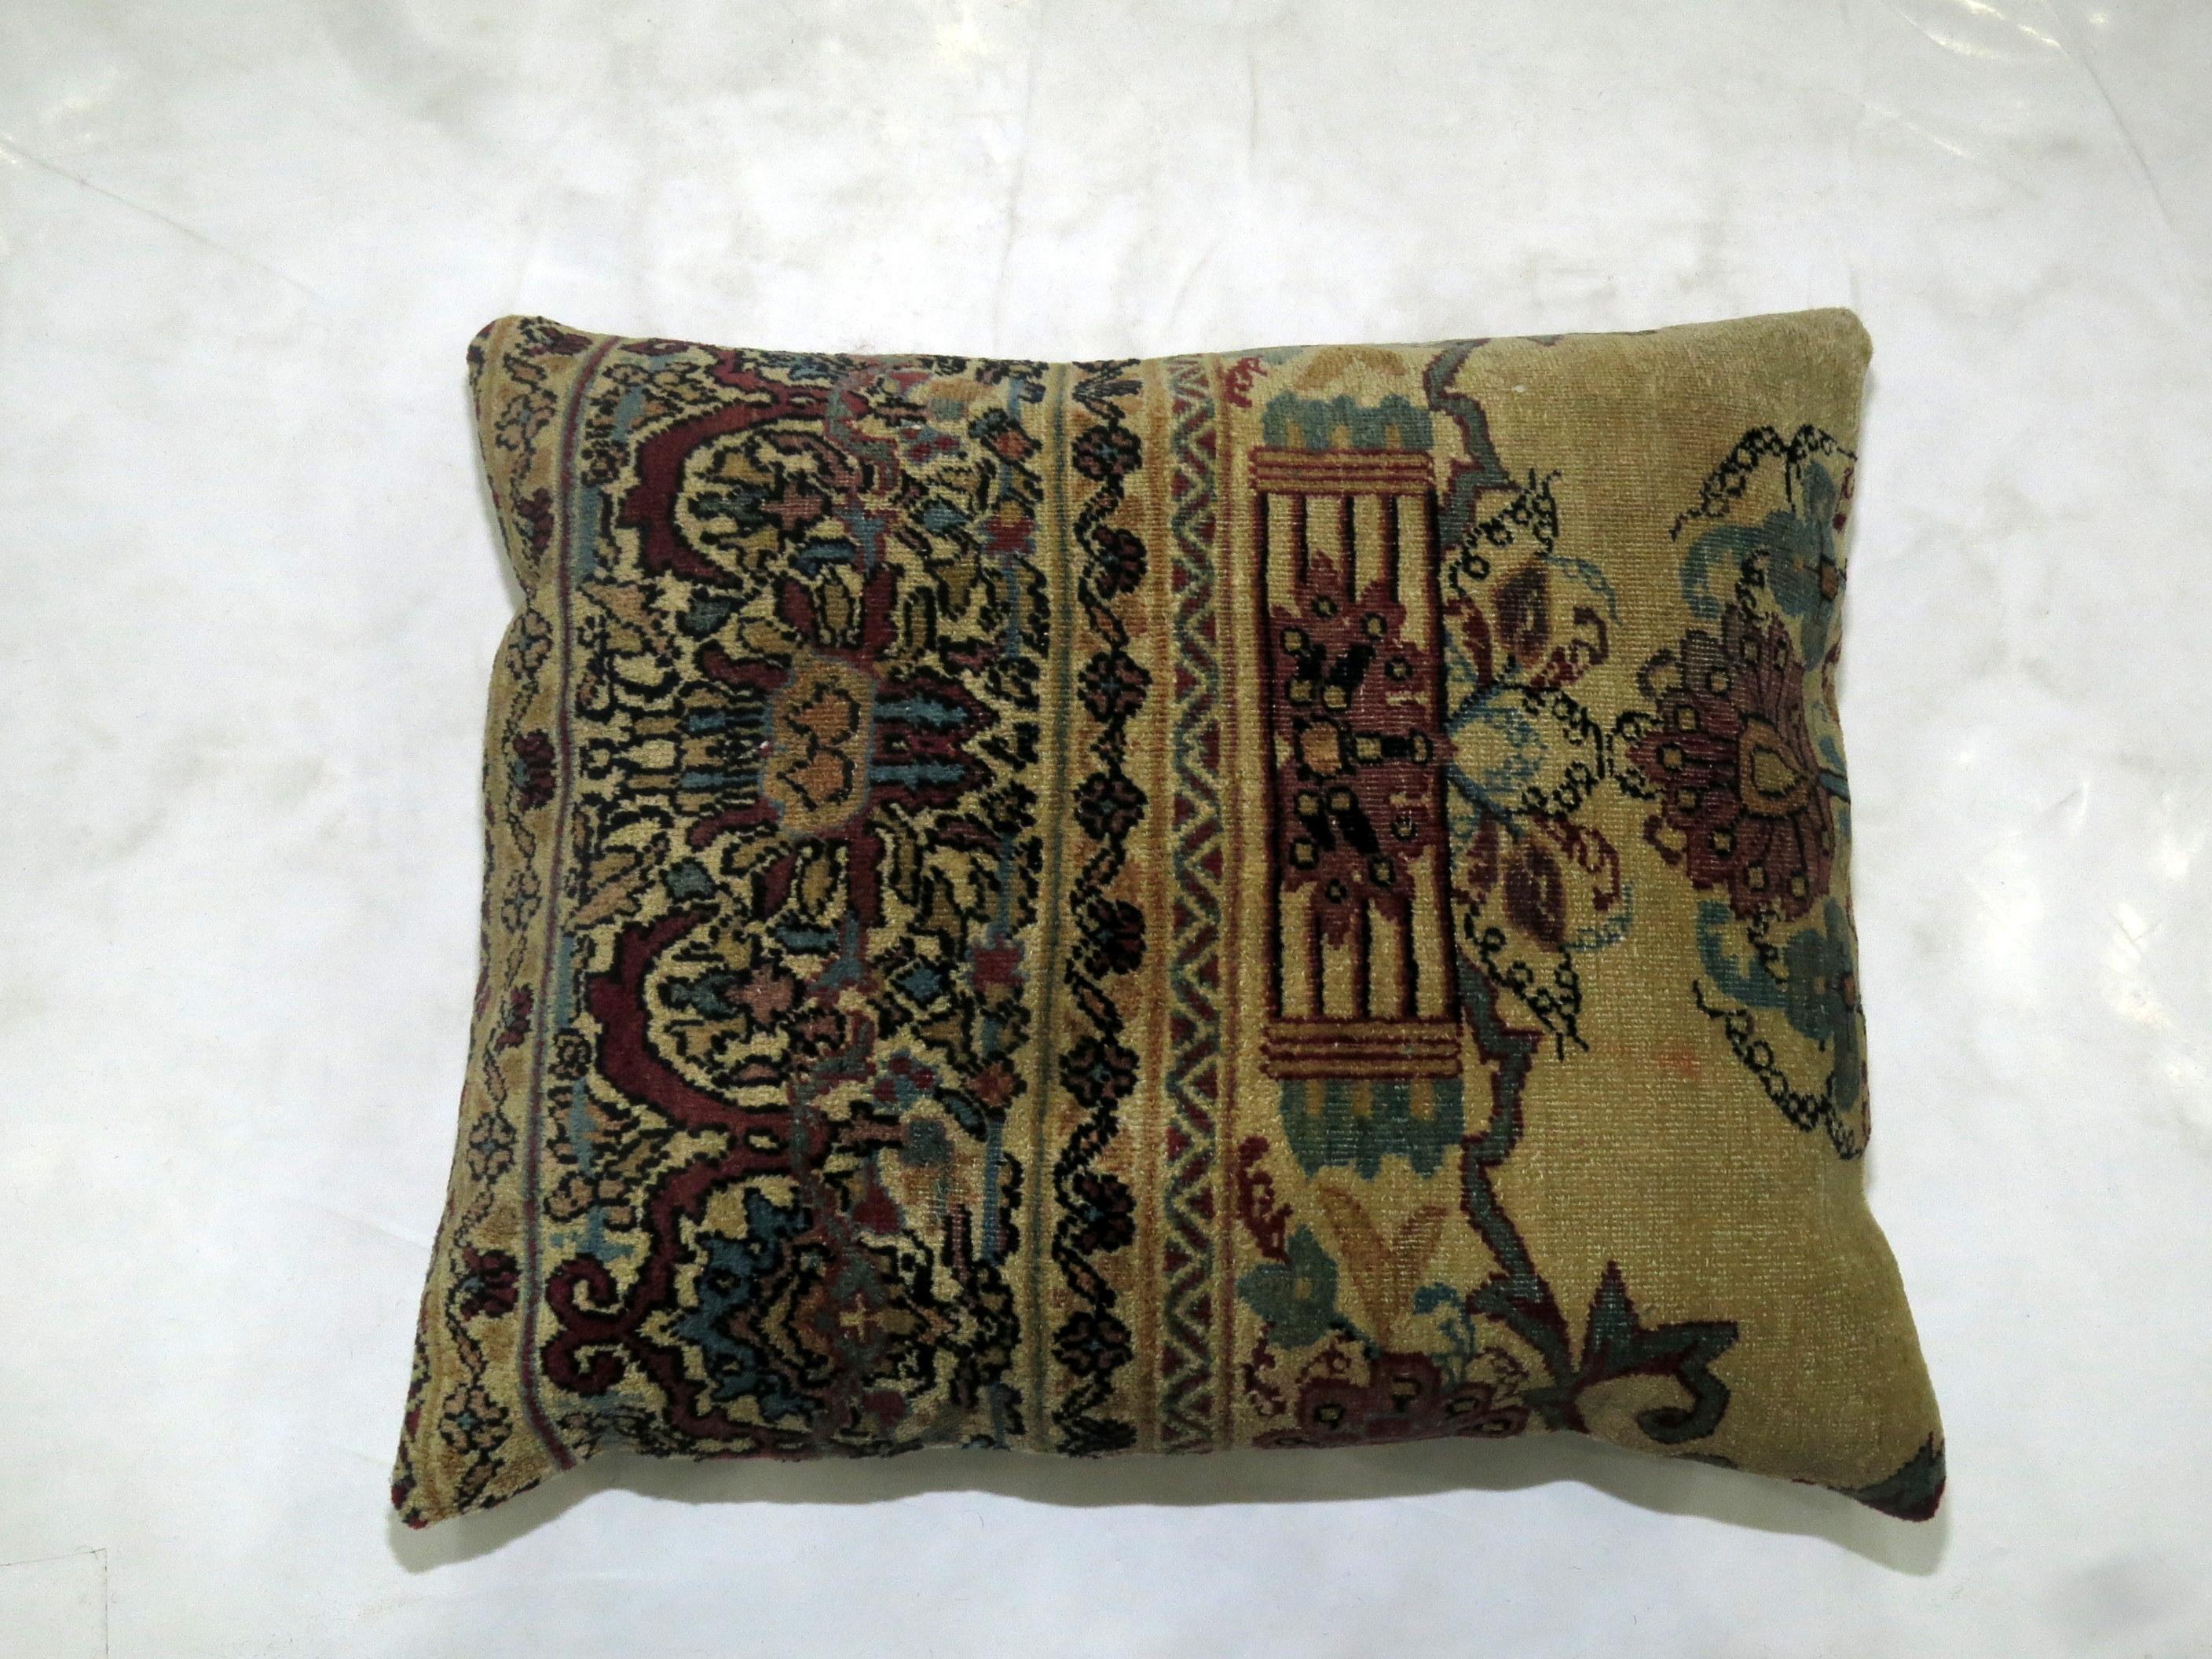 Rose and Khaki Persian Kerman Rug Pillows In Good Condition For Sale In New York, NY